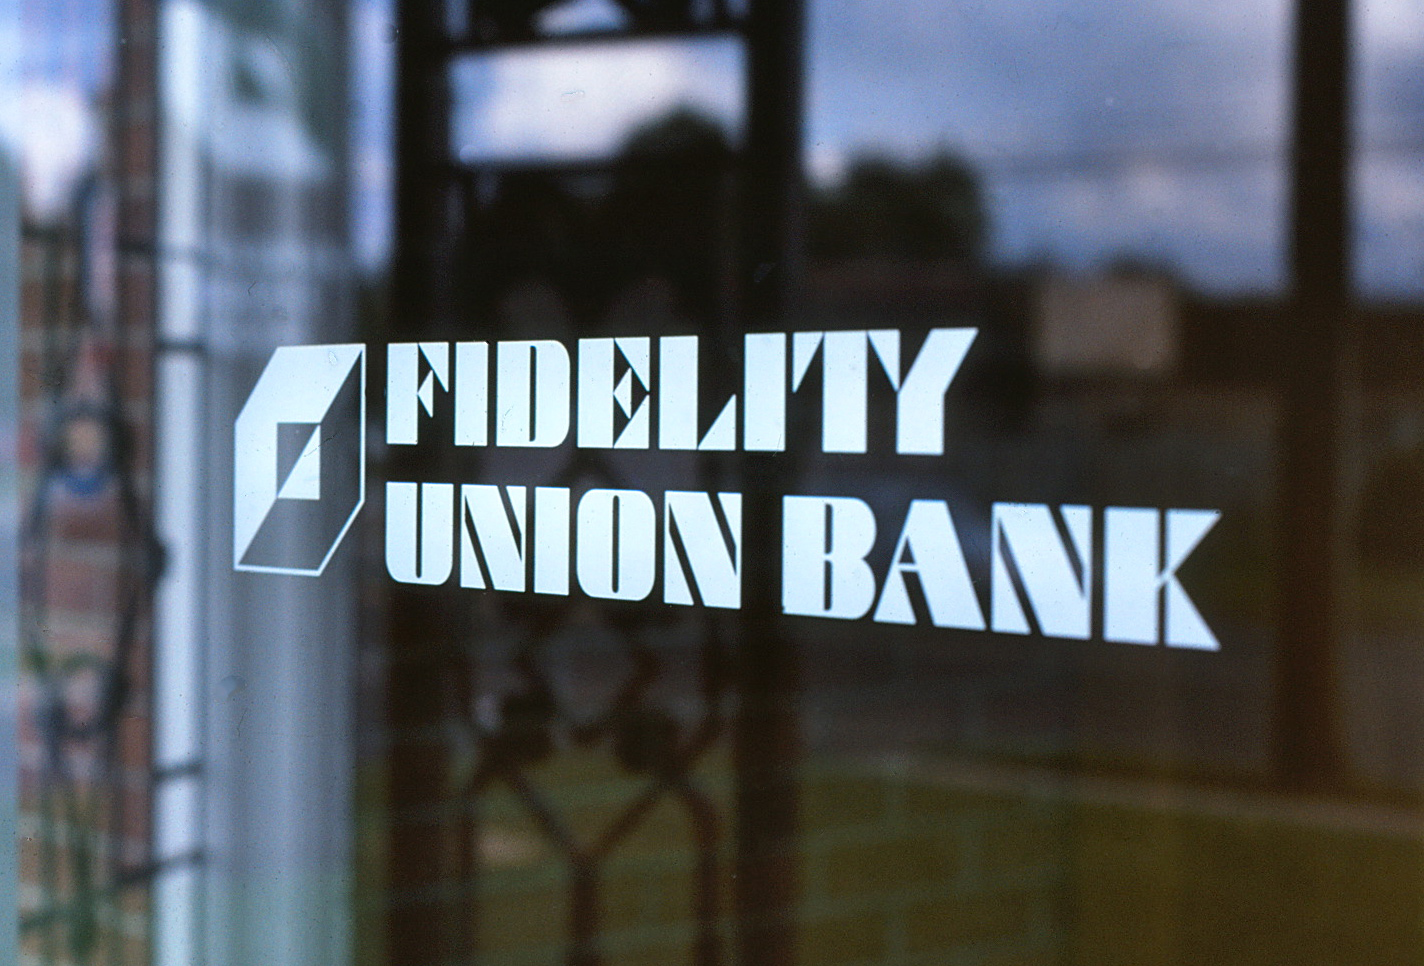 Fidelity Union Bank and logo mounted to a large glass window with white vinyl diecuts.